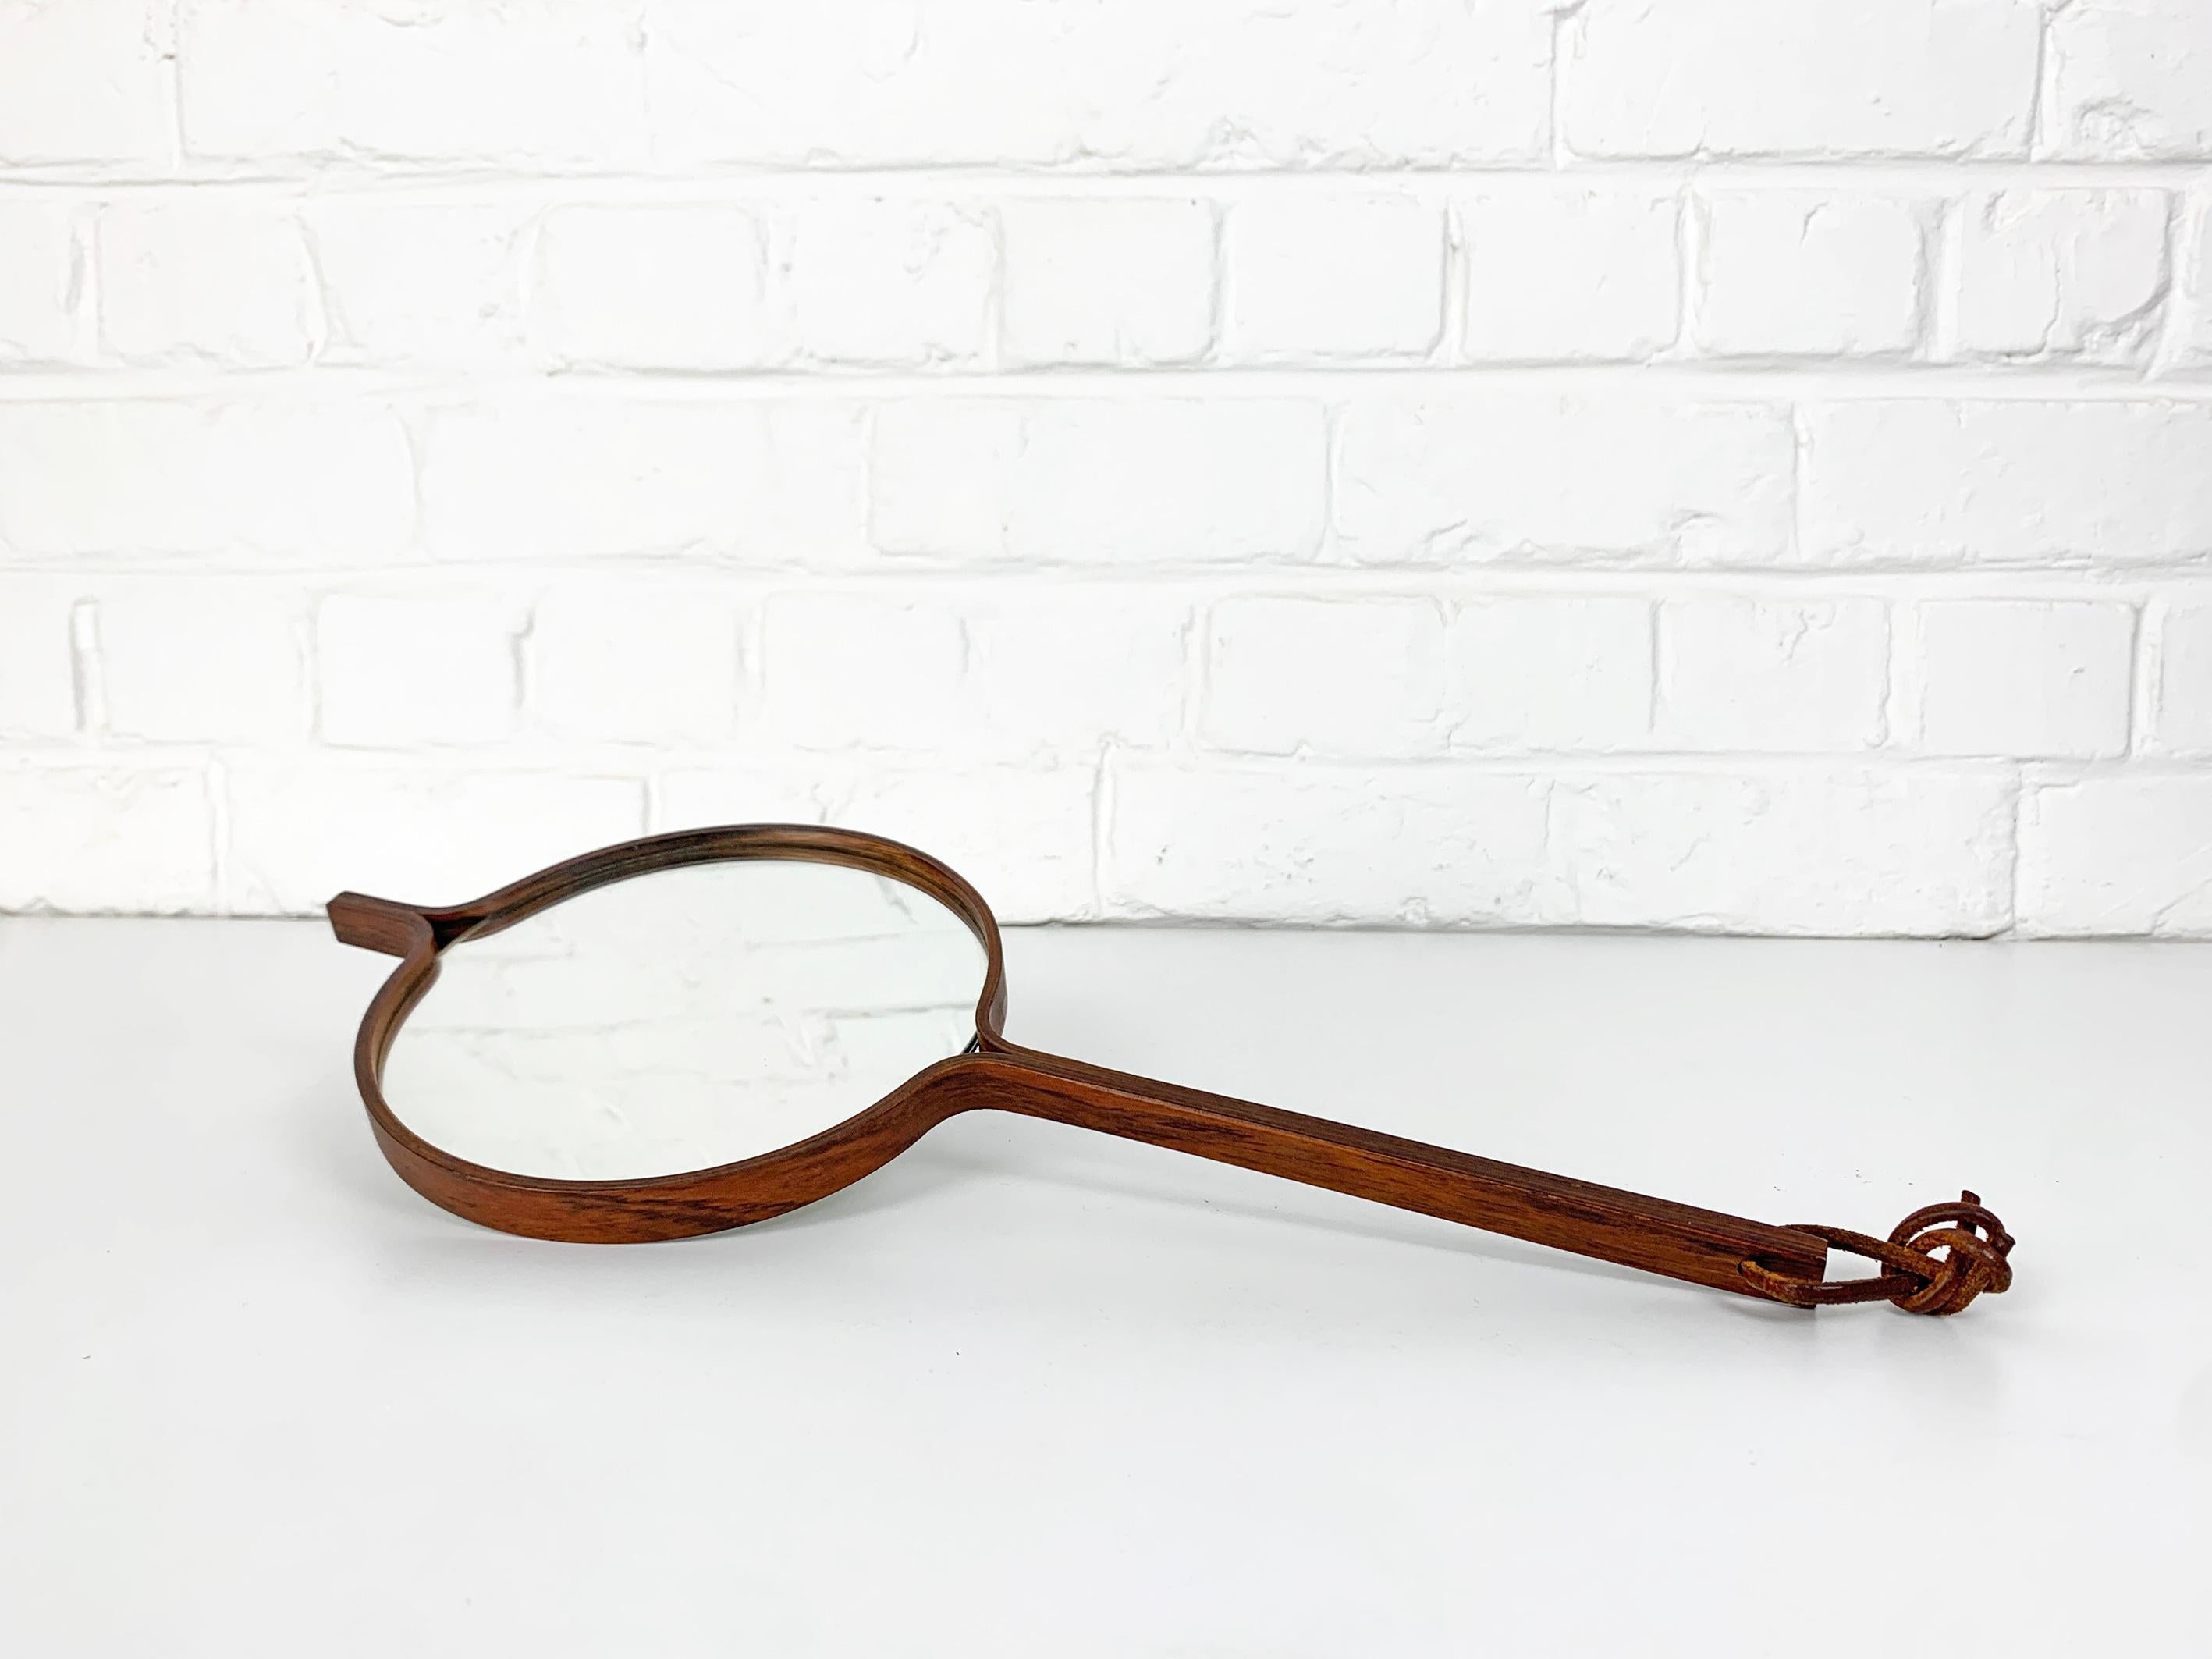 Mid-Century Hand mirror in ebonized wood or teak wood by Bech & Starup for Den Permanente, Denmark. Scandinavian minimalistic design.

Features a leather strap for wall hanging, can be used as a wall- or hand-mirror. 

This mirror has often be